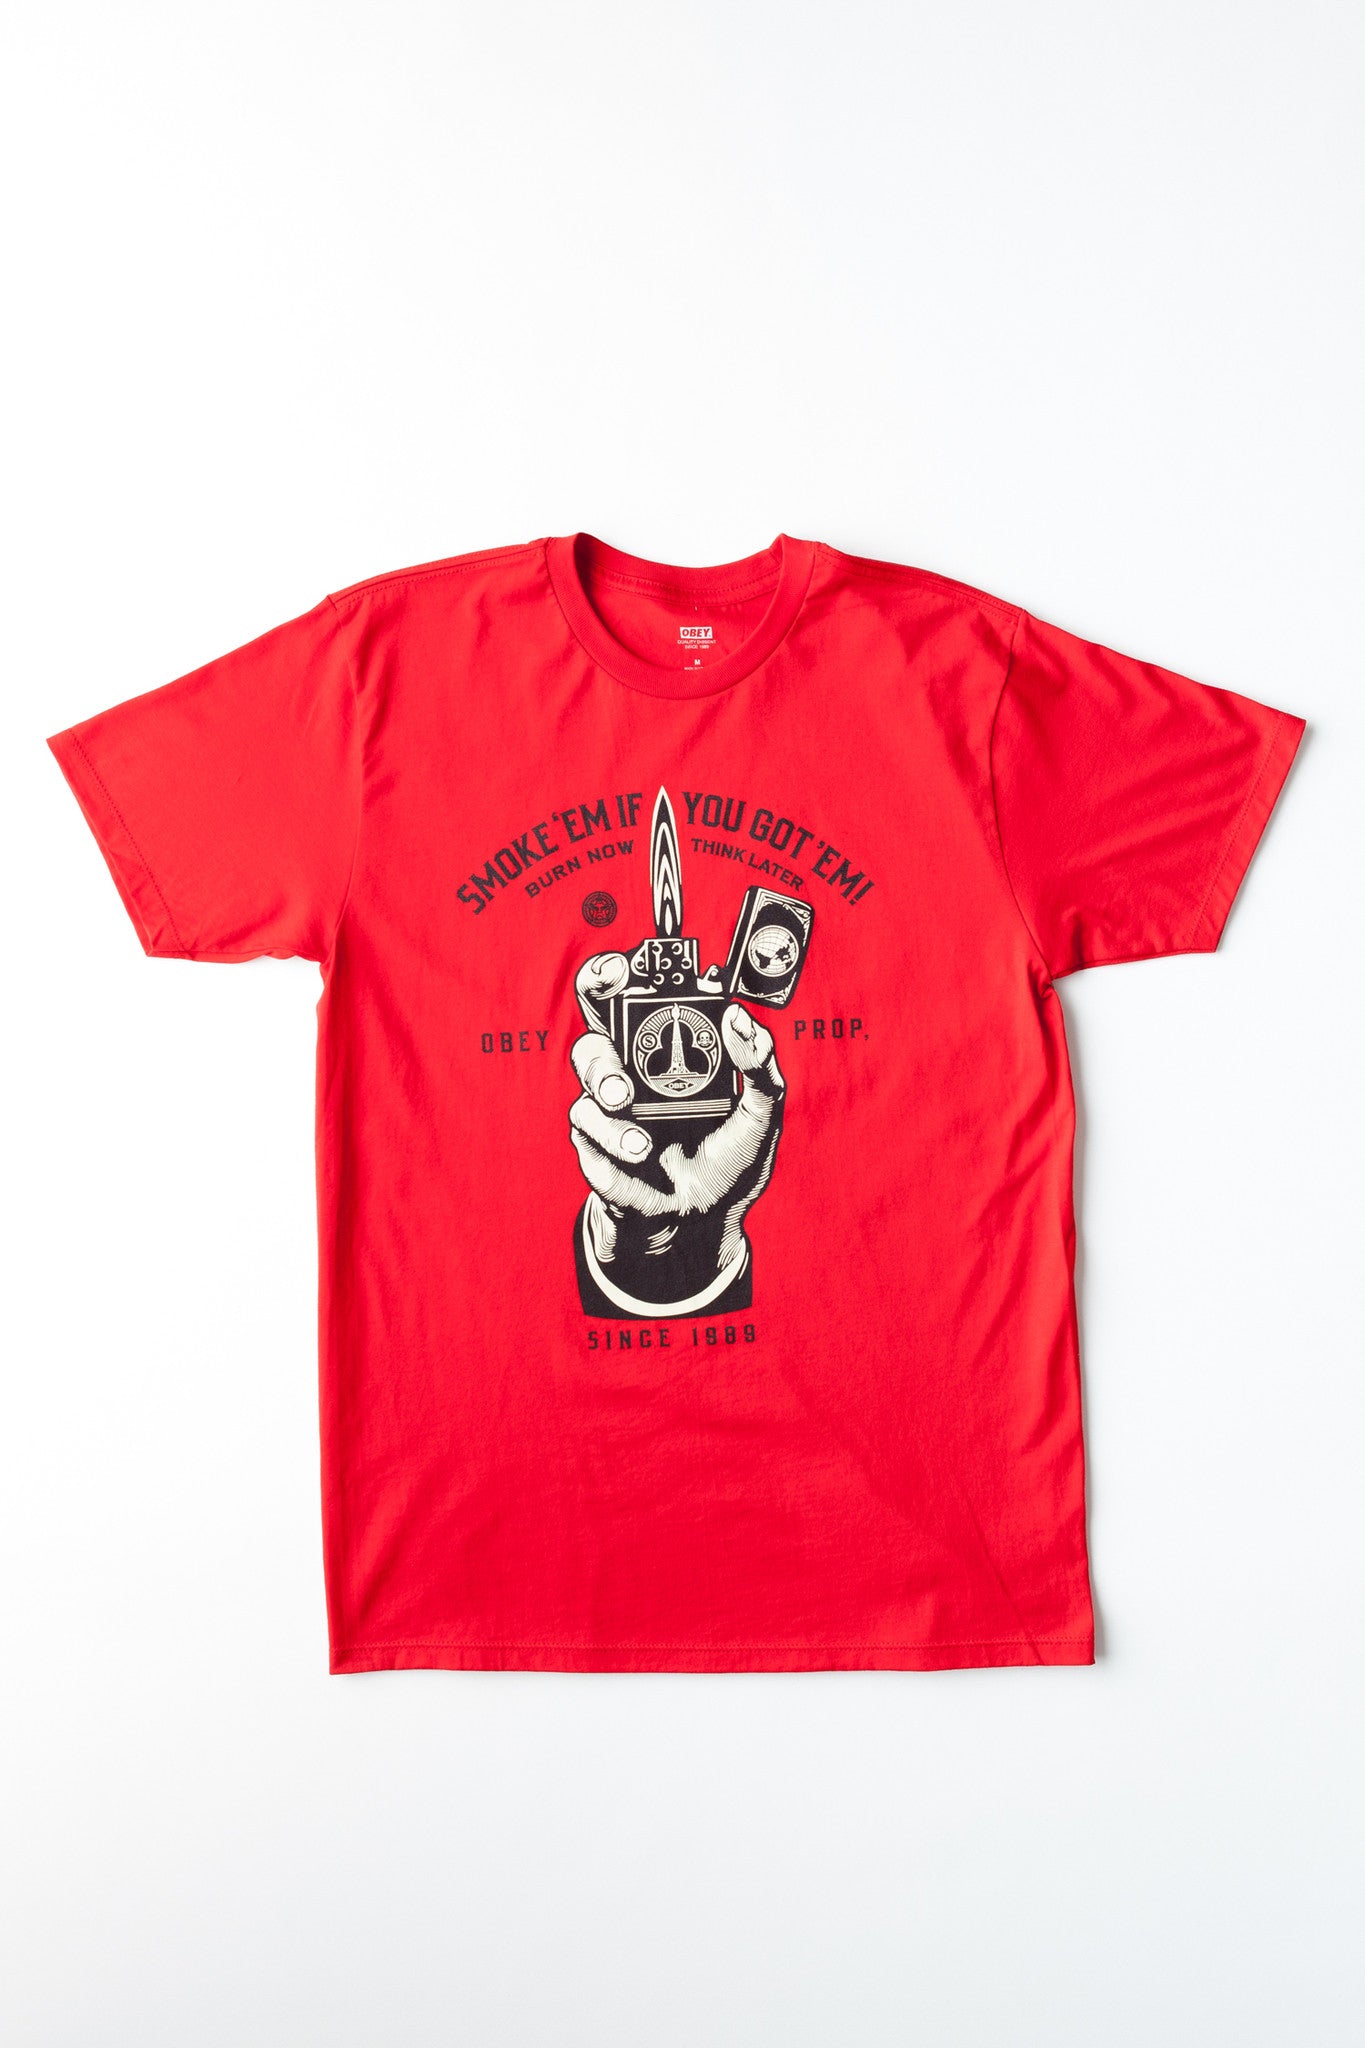 OBEY - Smoke 'Em Men's Shirt, Red - The Giant Peach